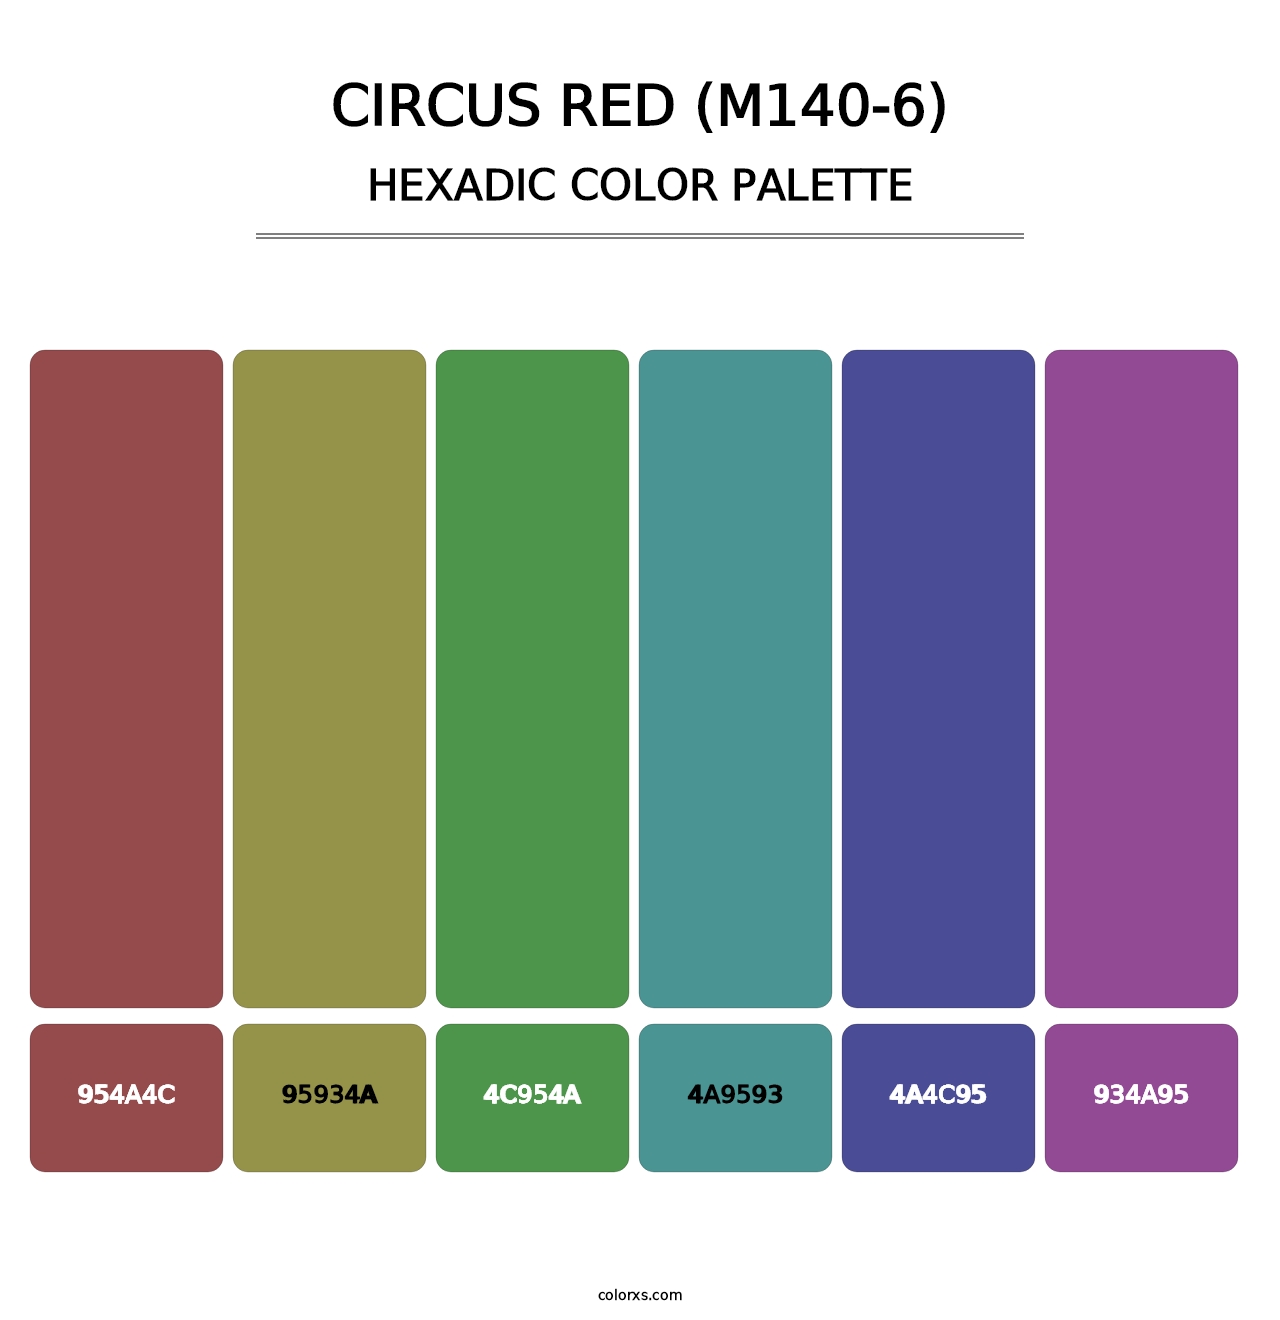 Circus Red (M140-6) - Hexadic Color Palette